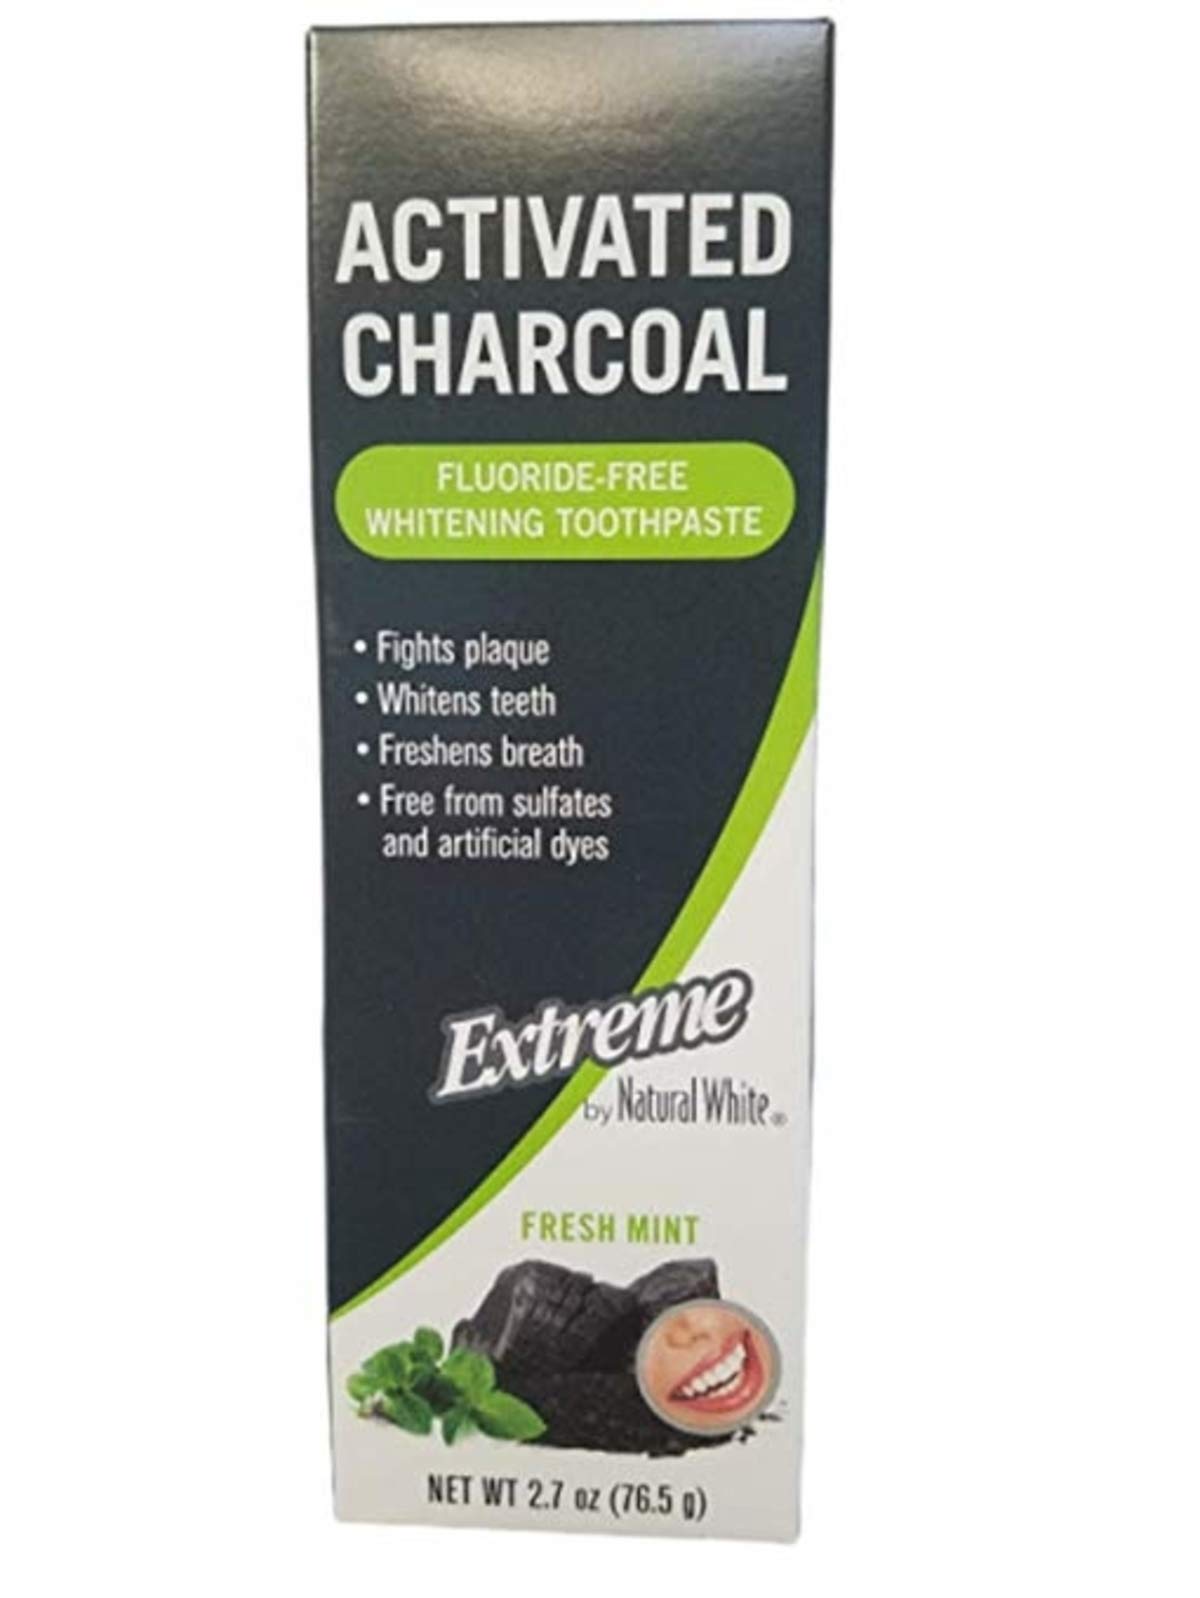 Activated CharcoalExtreme - Fluoride Free - Whitening Toothpaste (1-Pack)